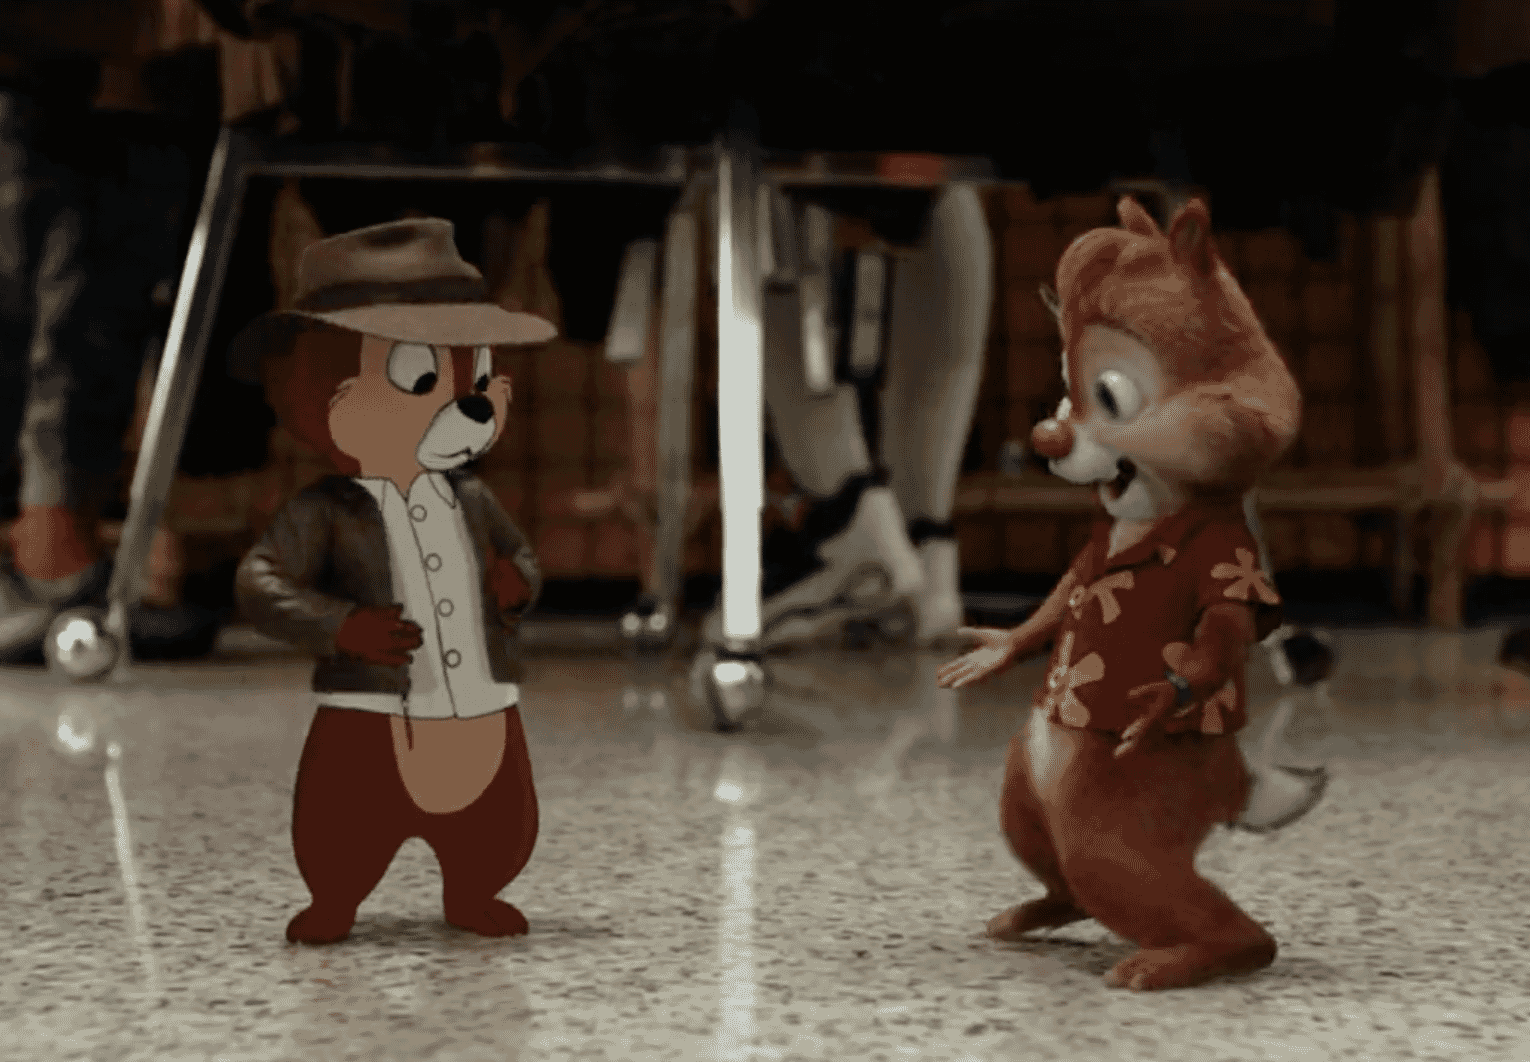 CHIP ‘N DALE RESCUE RANGERS: Why Classics Last